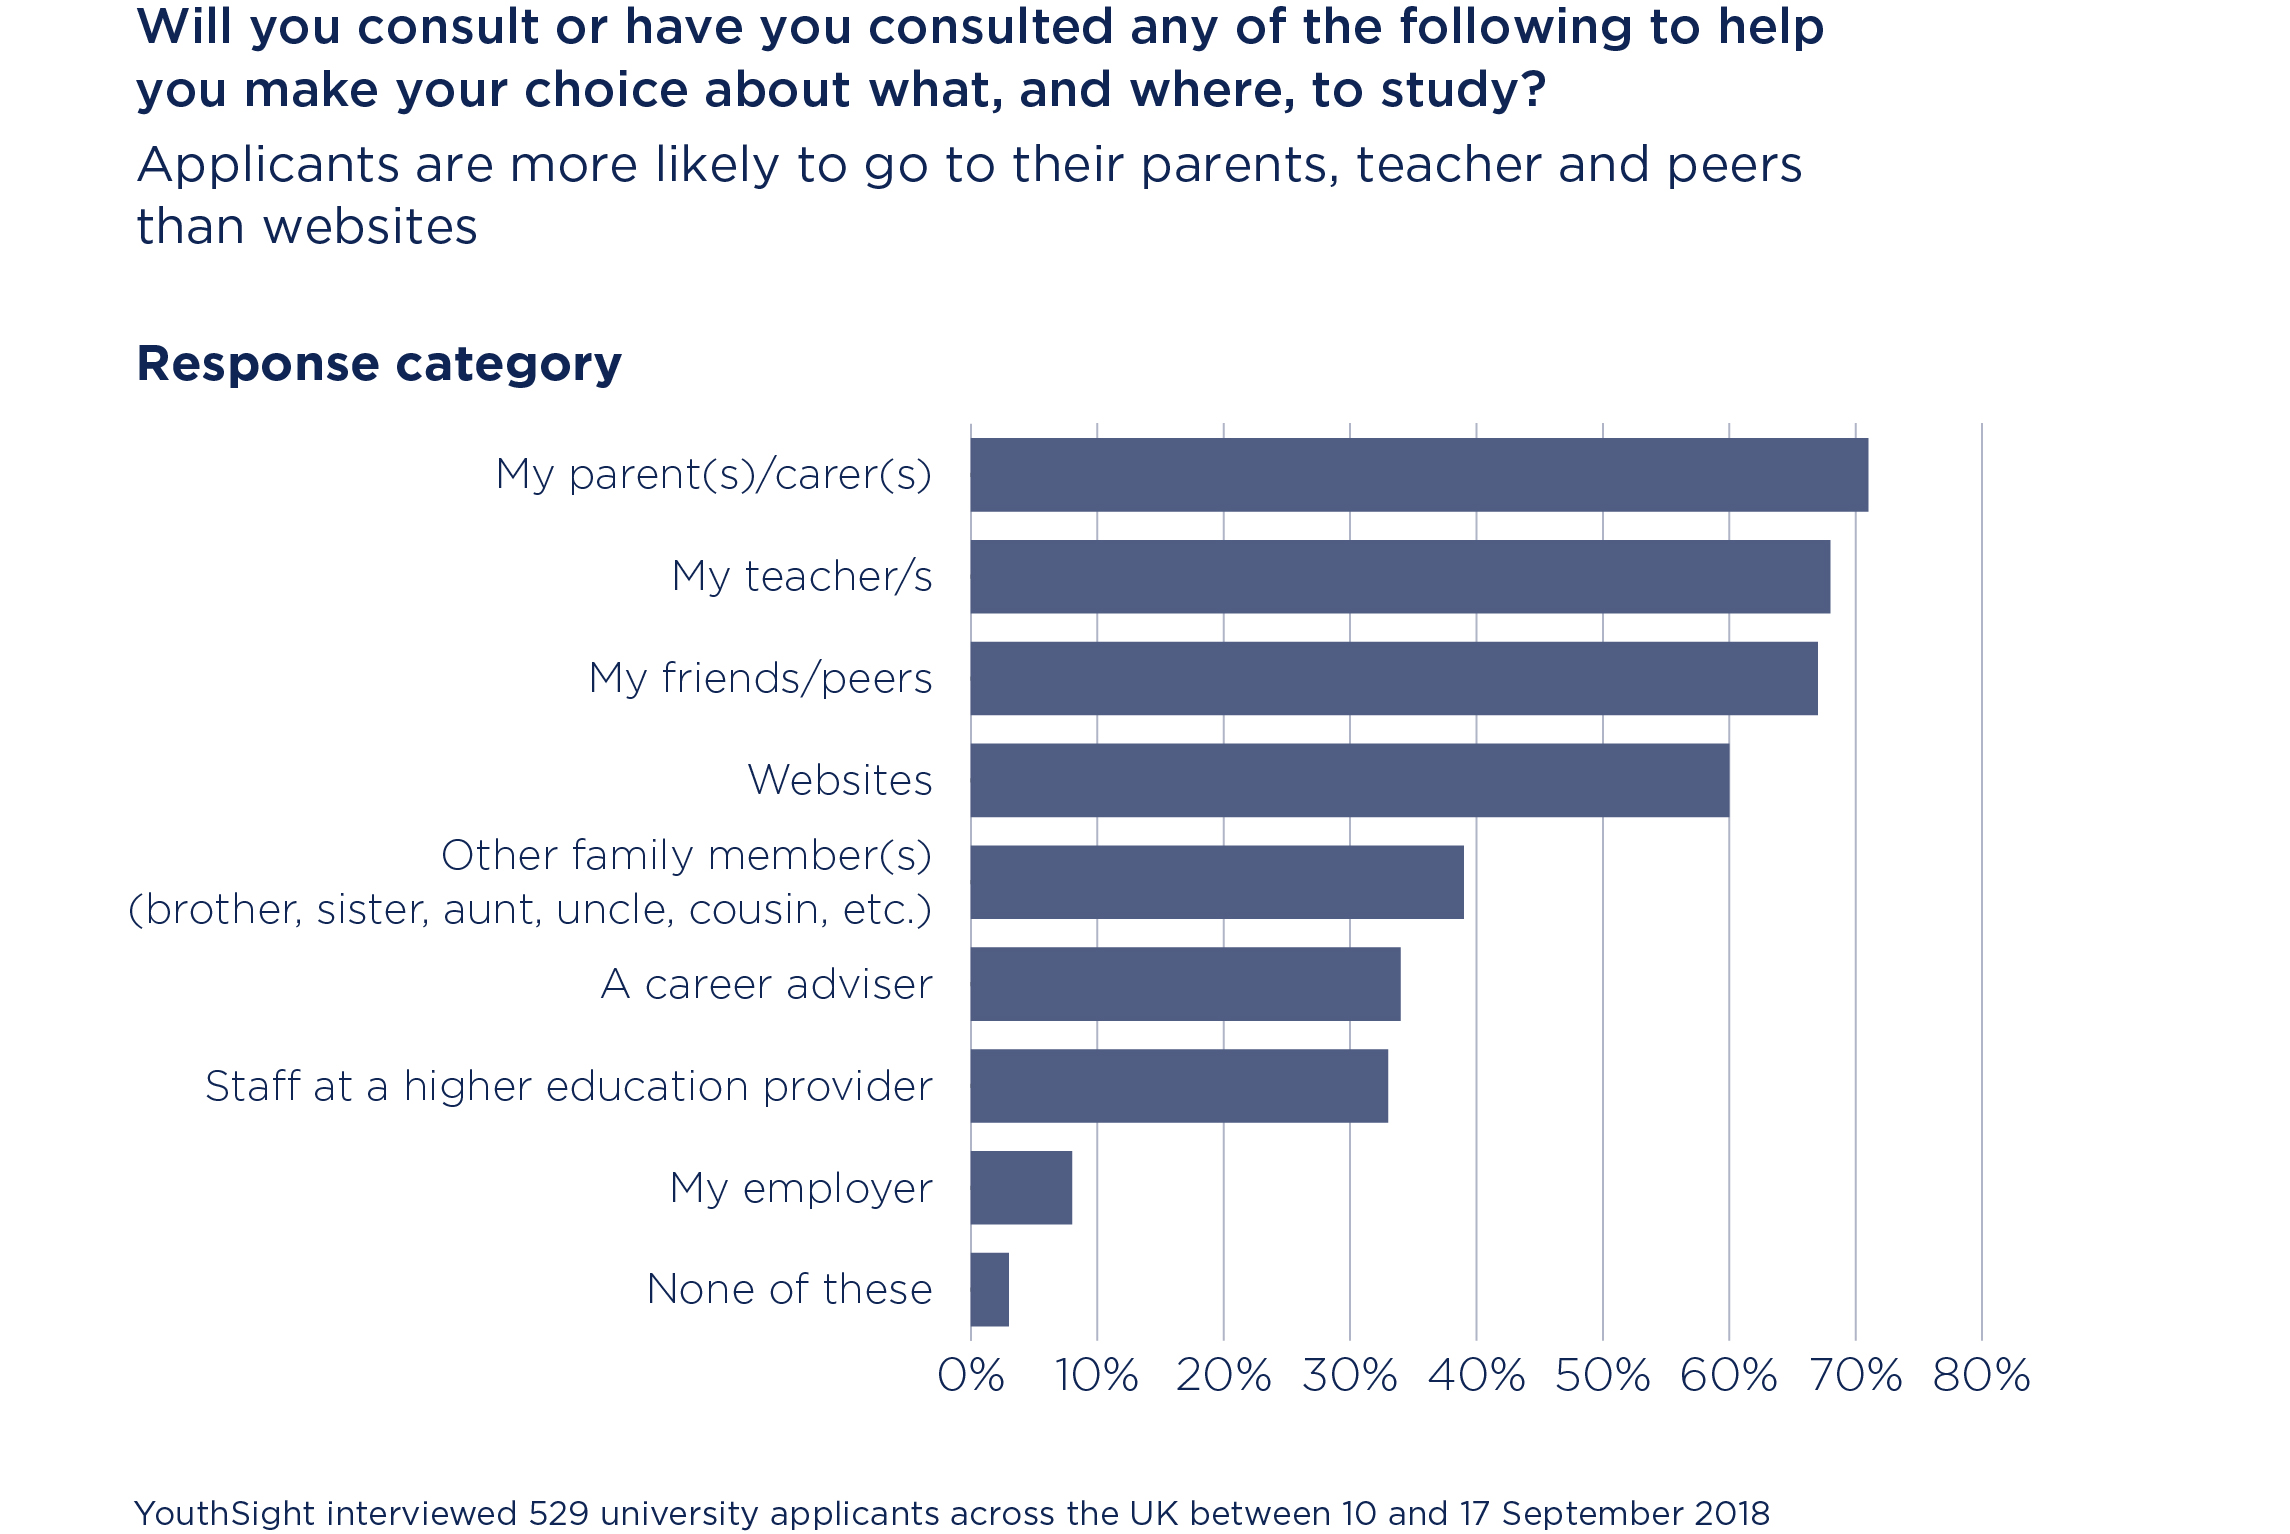 Chart showing which sources of information students and graduates are more likely to consult